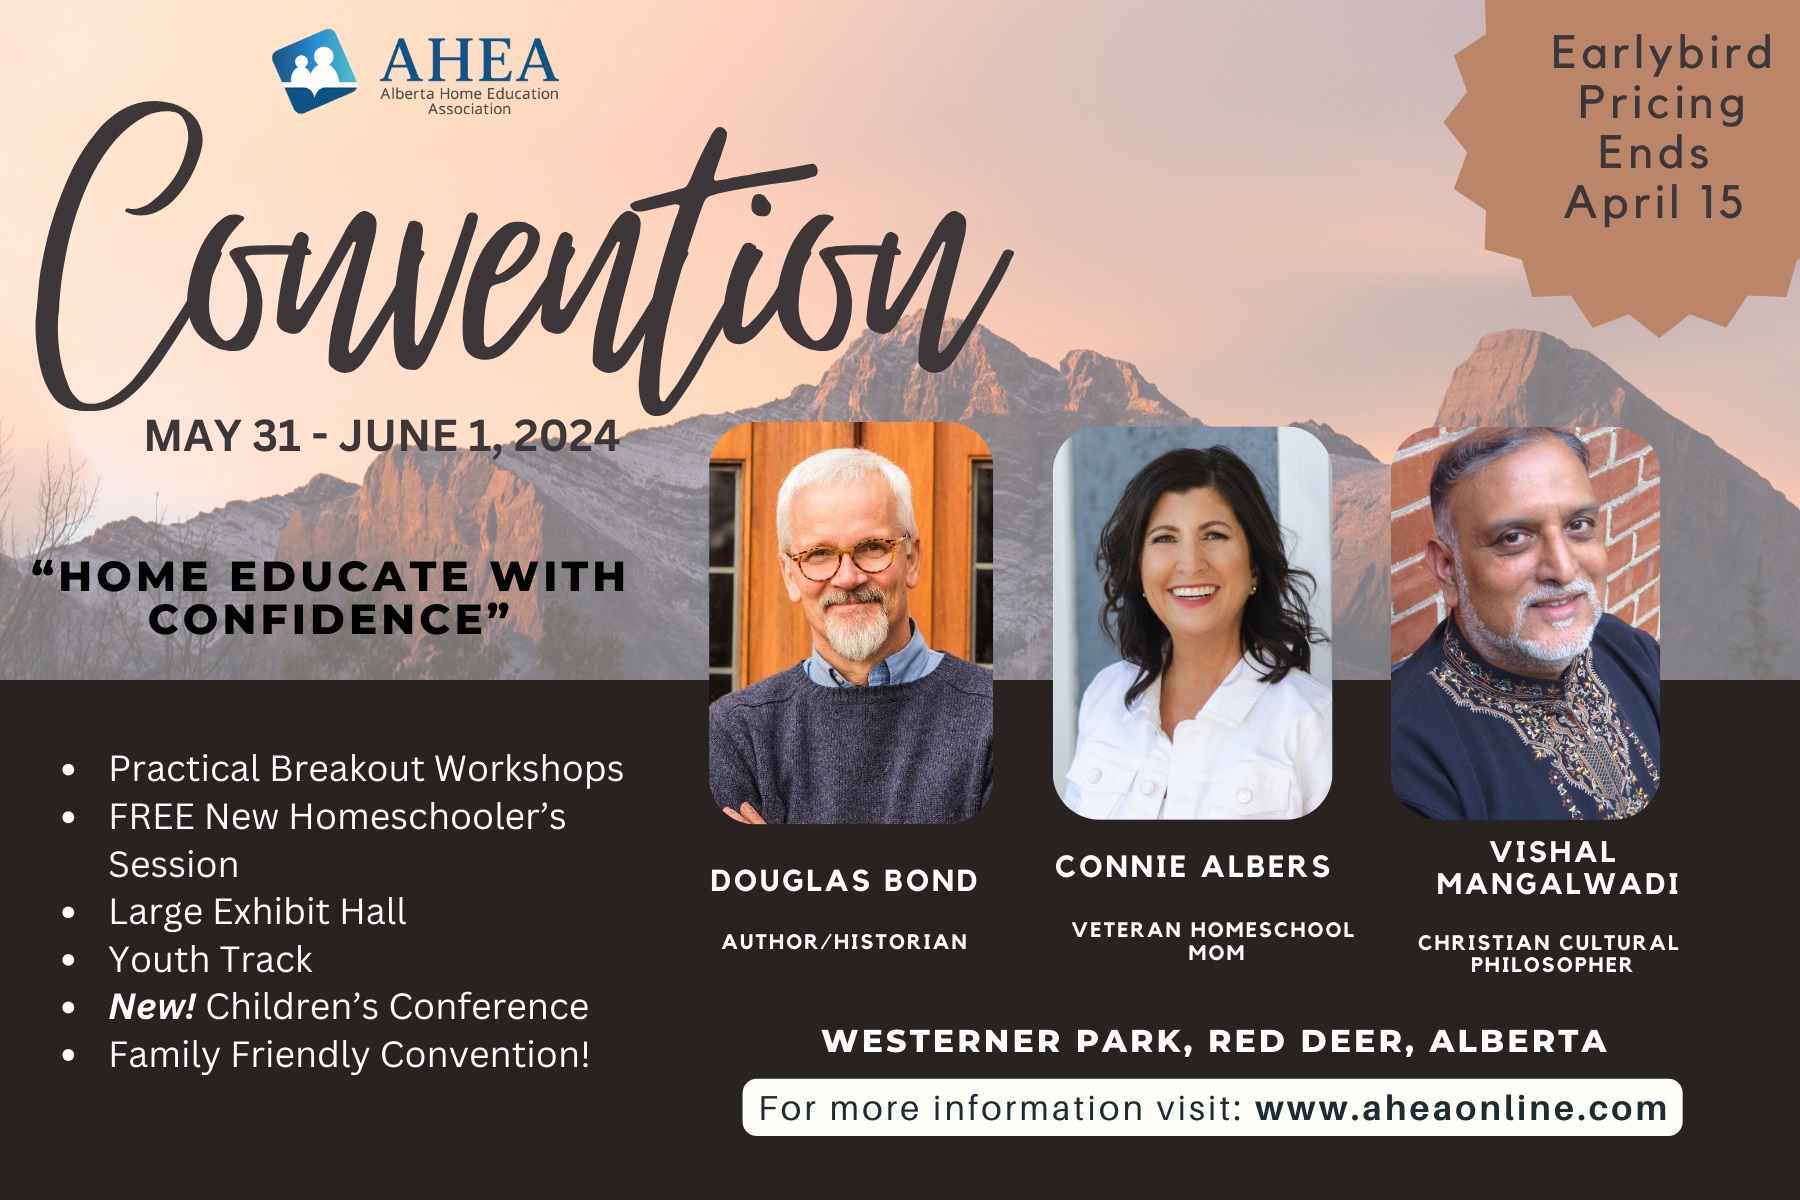 AHEA Convention 2021